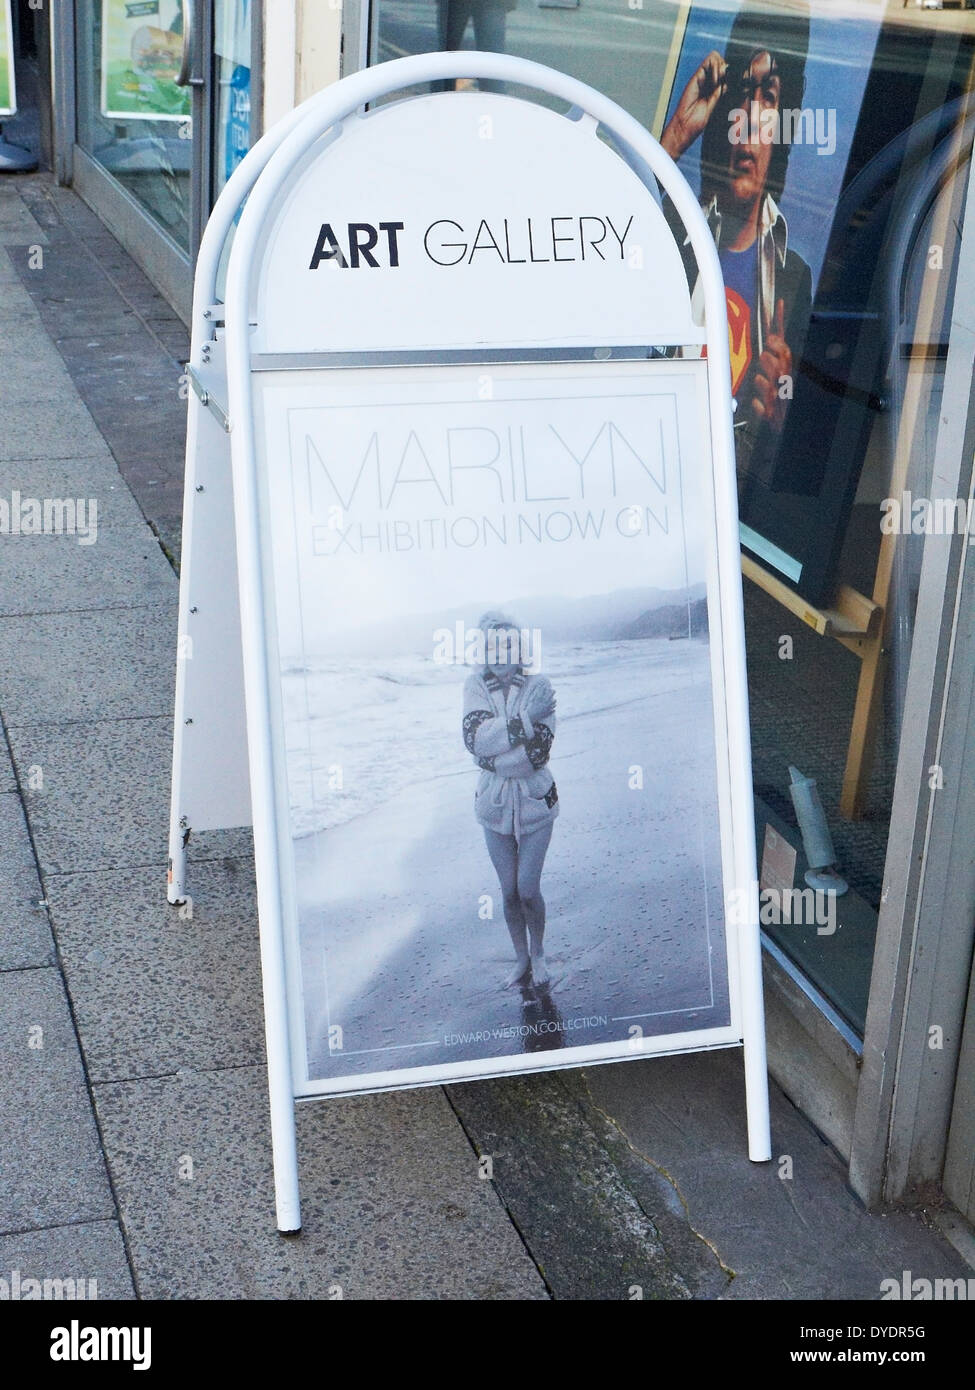 Marilyn Monroe exhibition, photographs by Edward Weston, on at the Art Gallery on Deansgate Manchester UK Stock Photo